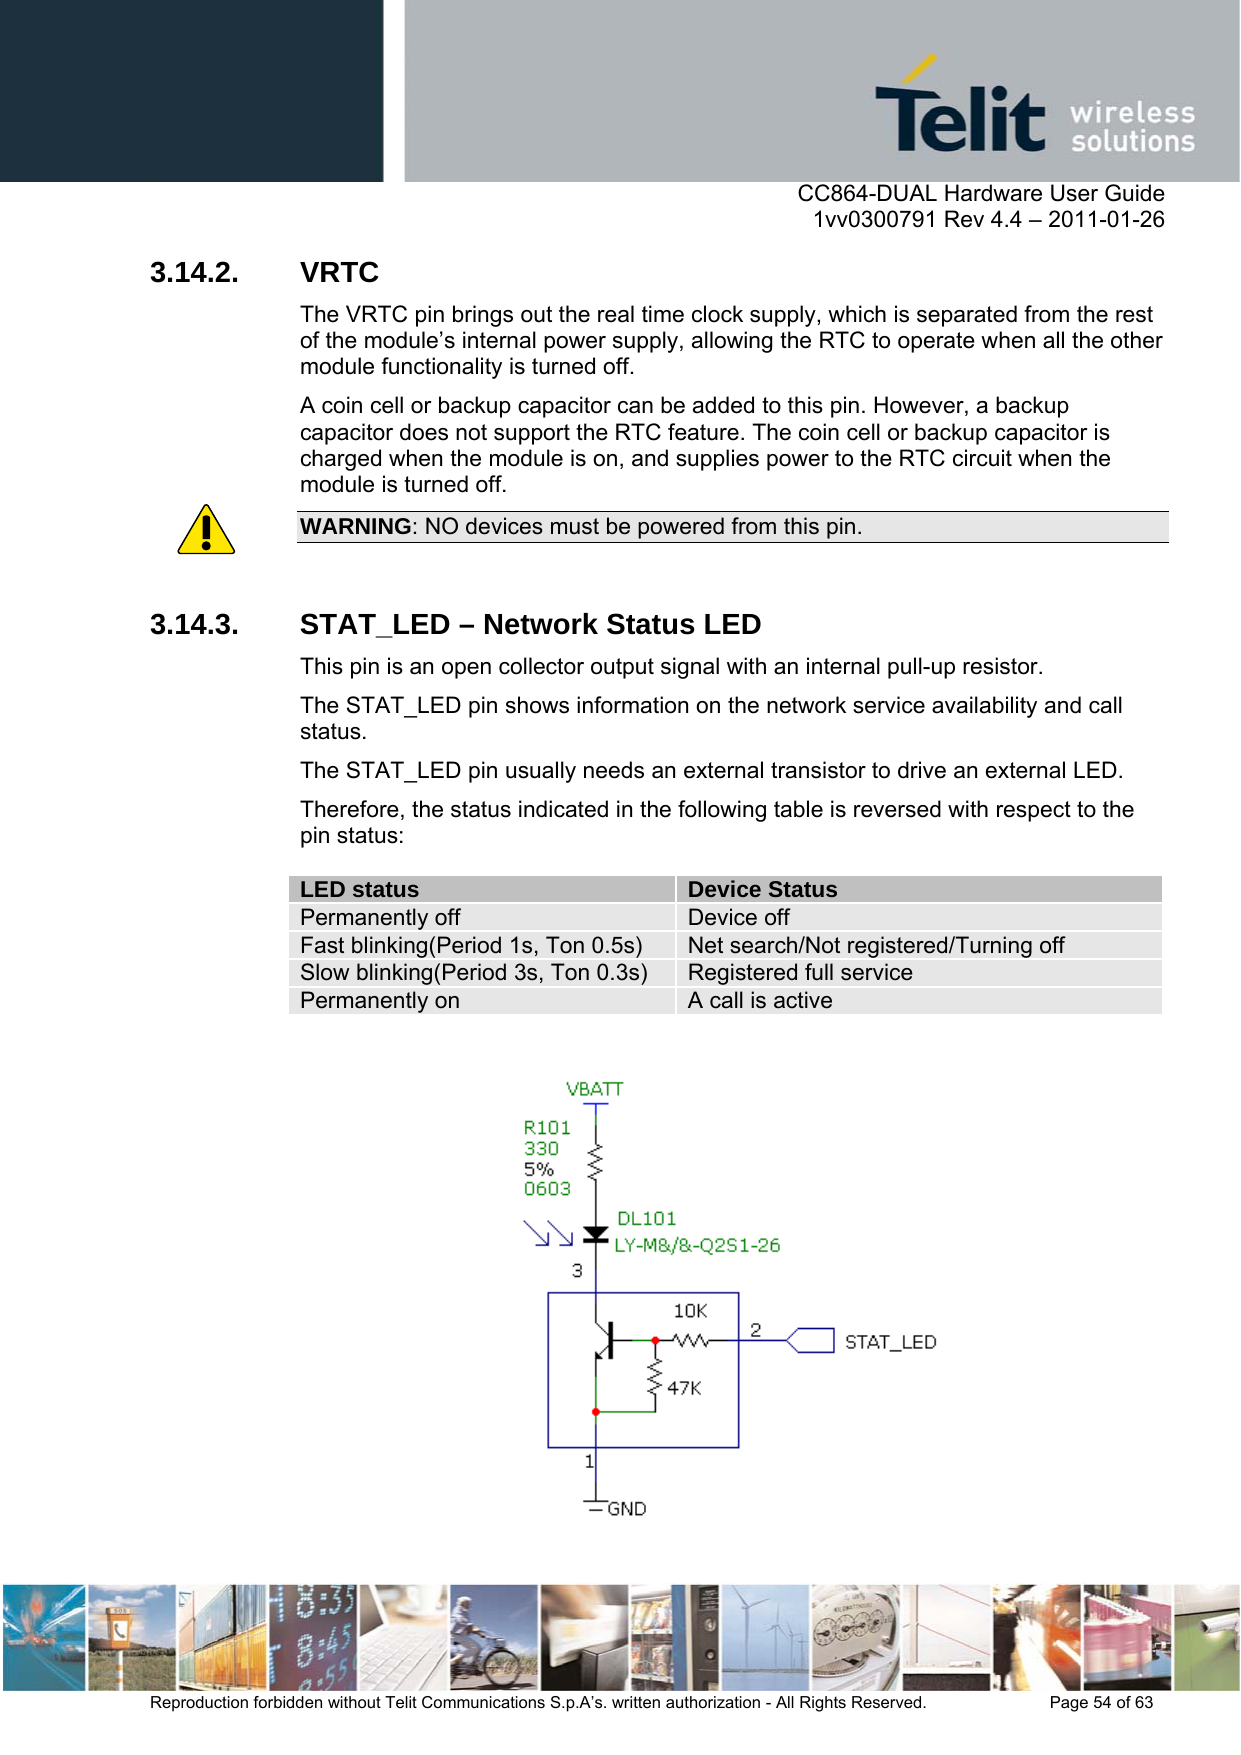      CC864-DUAL Hardware User Guide    1vv0300791 Rev 4.4 – 2011-01-26  Reproduction forbidden without Telit Communications S.p.A’s. written authorization - All Rights Reserved.    Page 54 of 63  3.14.2. VRTC The VRTC pin brings out the real time clock supply, which is separated from the rest of the module’s internal power supply, allowing the RTC to operate when all the other module functionality is turned off. A coin cell or backup capacitor can be added to this pin. However, a backup capacitor does not support the RTC feature. The coin cell or backup capacitor is charged when the module is on, and supplies power to the RTC circuit when the module is turned off. WARNING: NO devices must be powered from this pin.   3.14.3.  STAT_LED – Network Status LED This pin is an open collector output signal with an internal pull-up resistor. The STAT_LED pin shows information on the network service availability and call status.  The STAT_LED pin usually needs an external transistor to drive an external LED. Therefore, the status indicated in the following table is reversed with respect to the pin status:  LED status  Device Status Permanently off  Device off Fast blinking(Period 1s, Ton 0.5s)  Net search/Not registered/Turning off Slow blinking(Period 3s, Ton 0.3s)  Registered full service Permanently on  A call is active    